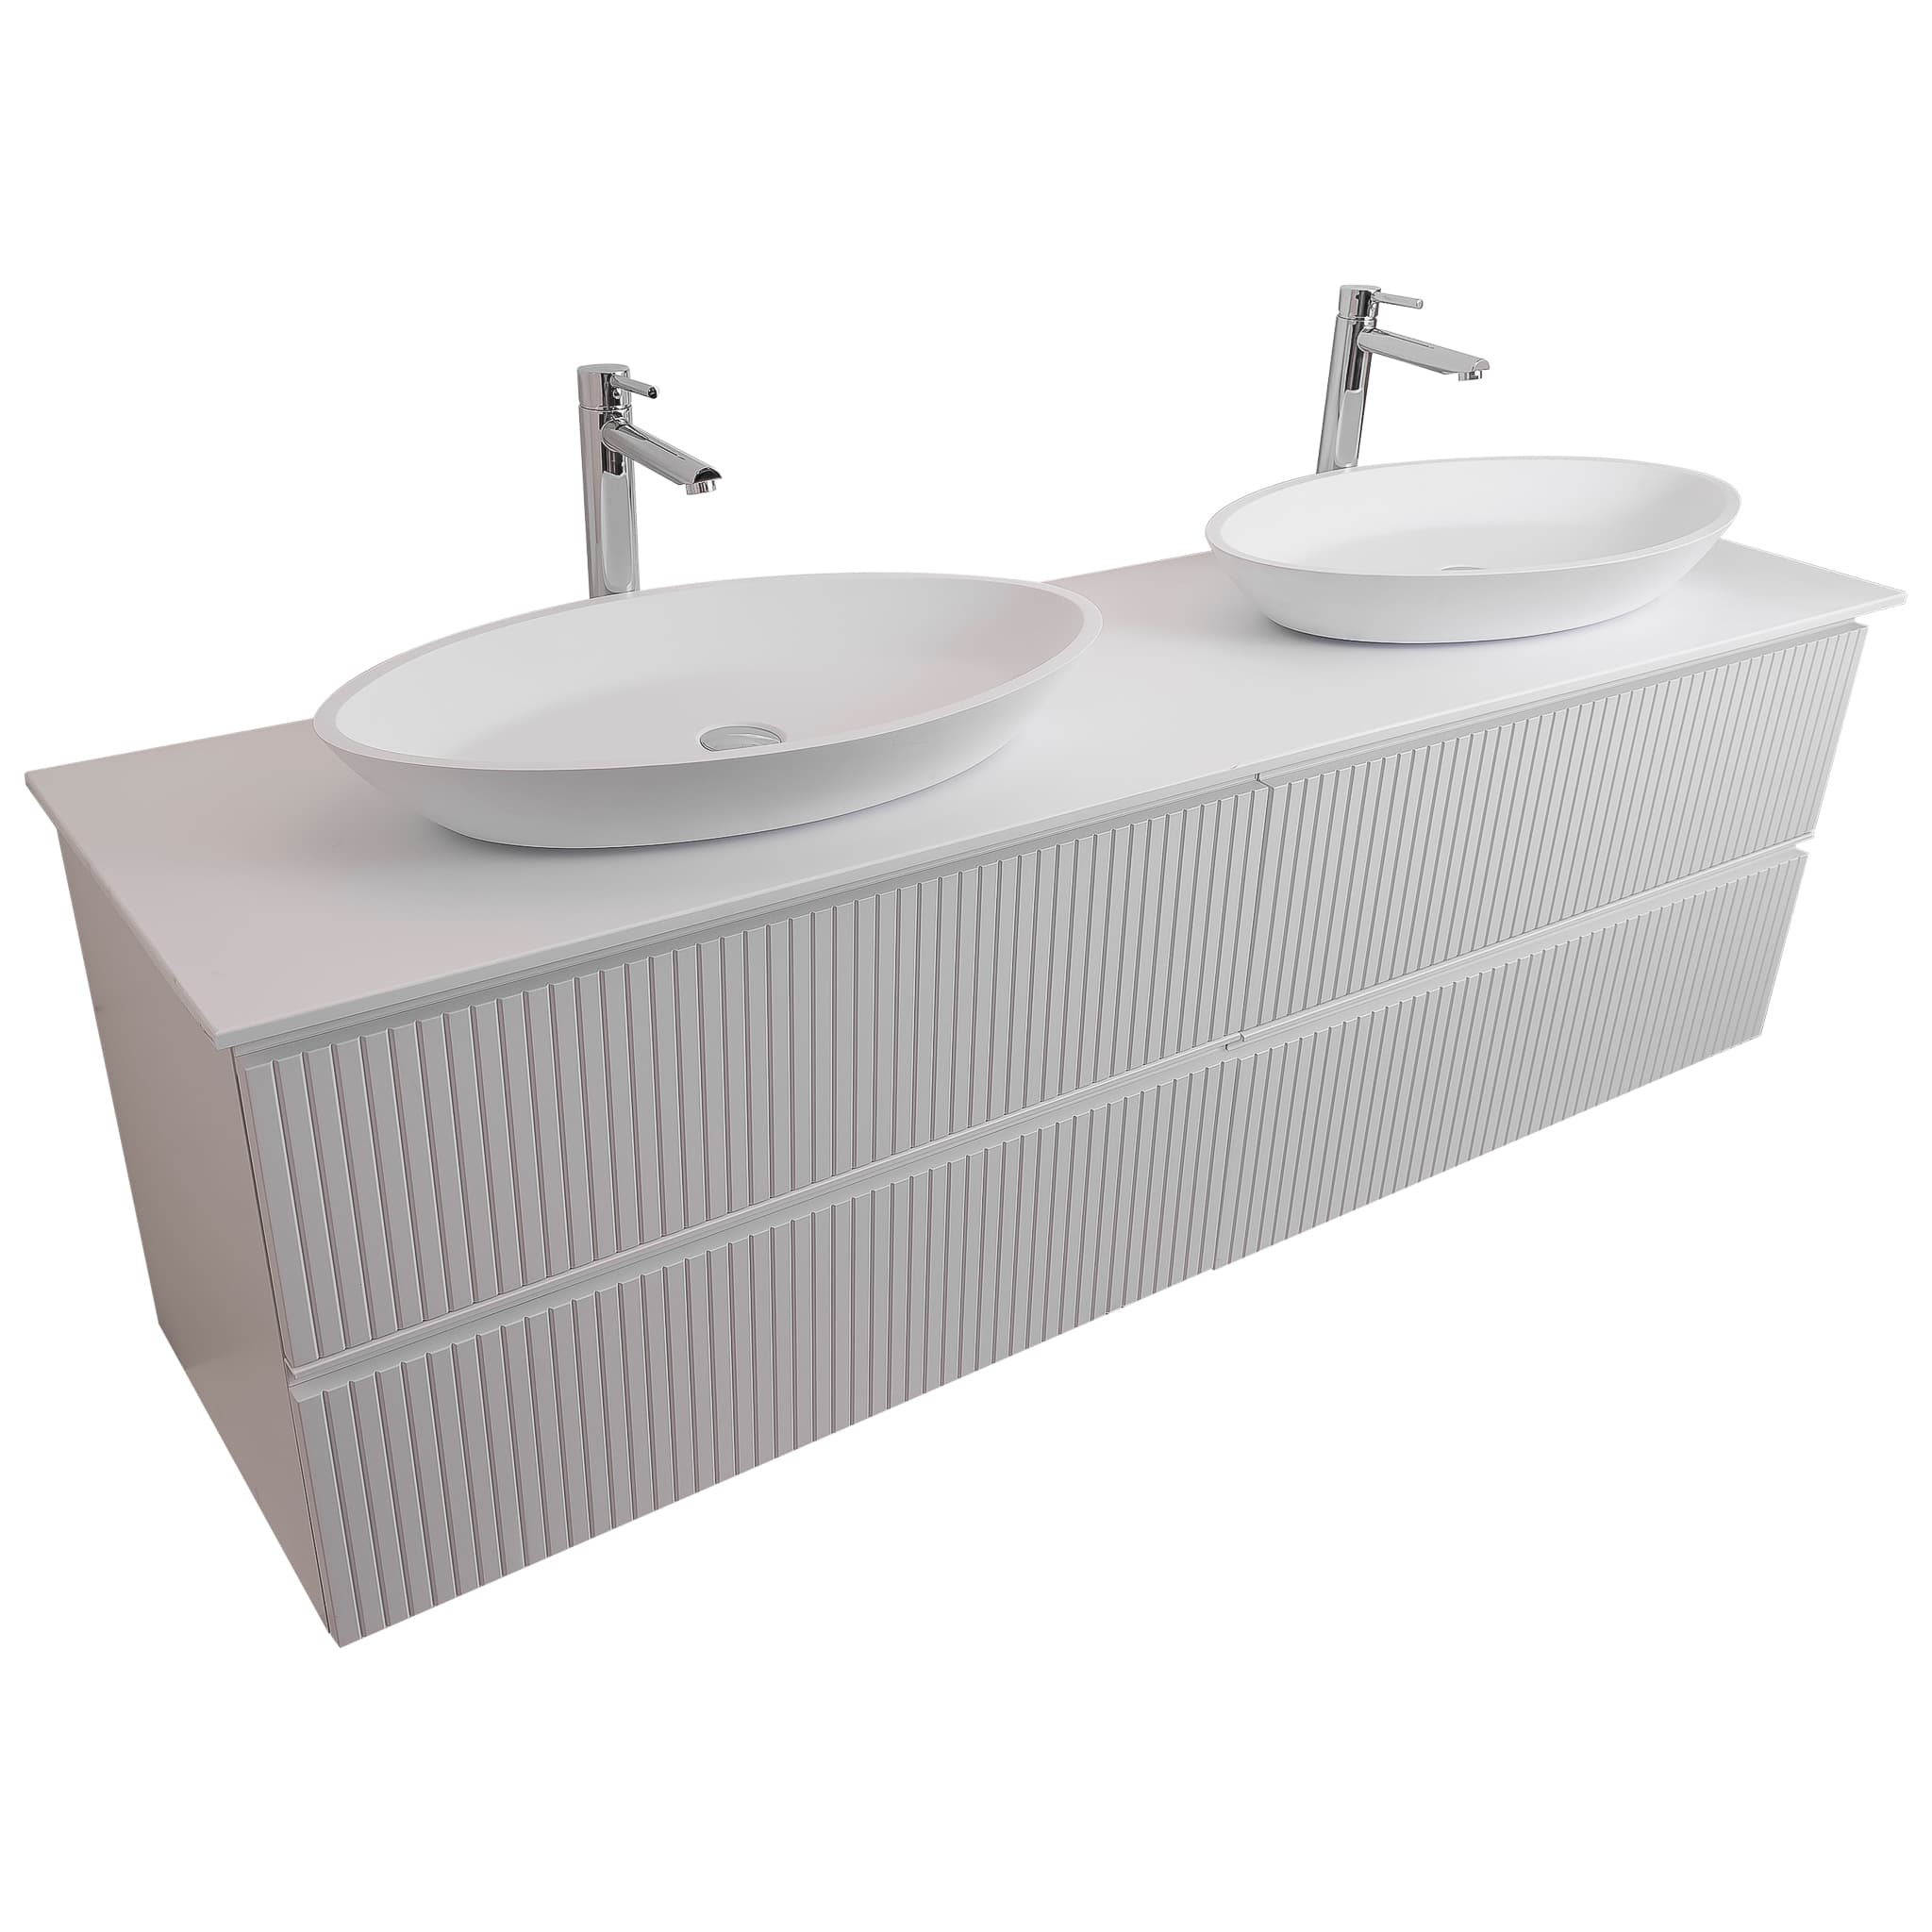 Ares 63 Matte White Cabinet, Solid Surface Flat White Counter And Two Oval Solid Surface White Basin 1305, Wall Mounted Modern Vanity Set